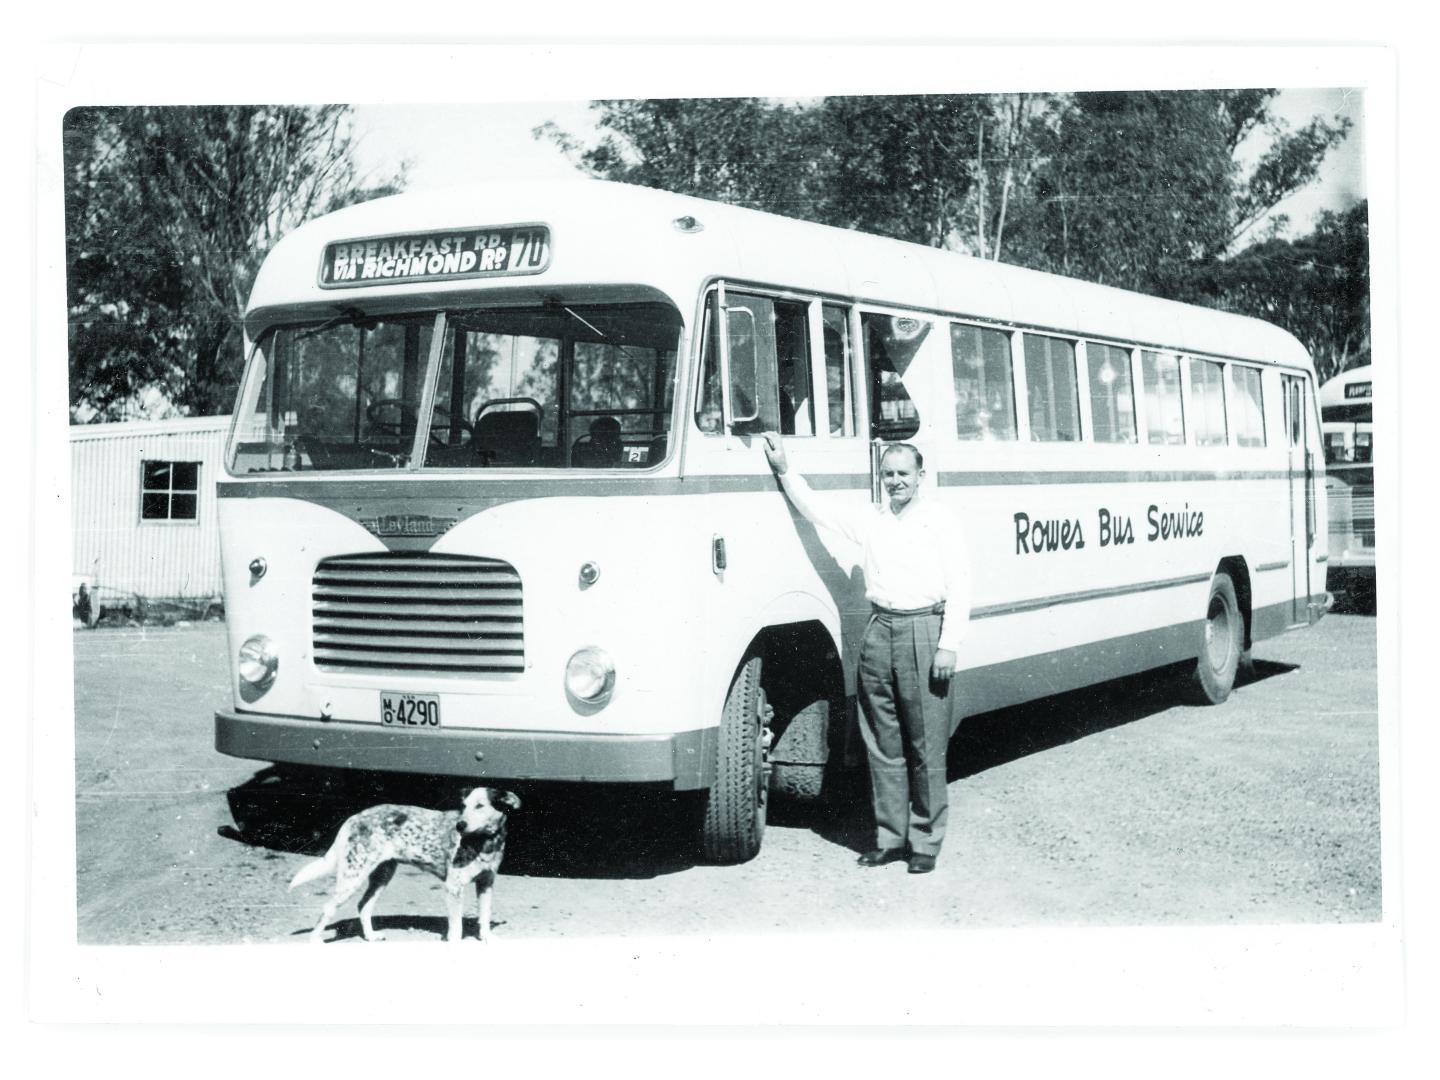 Dick with one of the Rowes Bus Services vehicles in 1960s